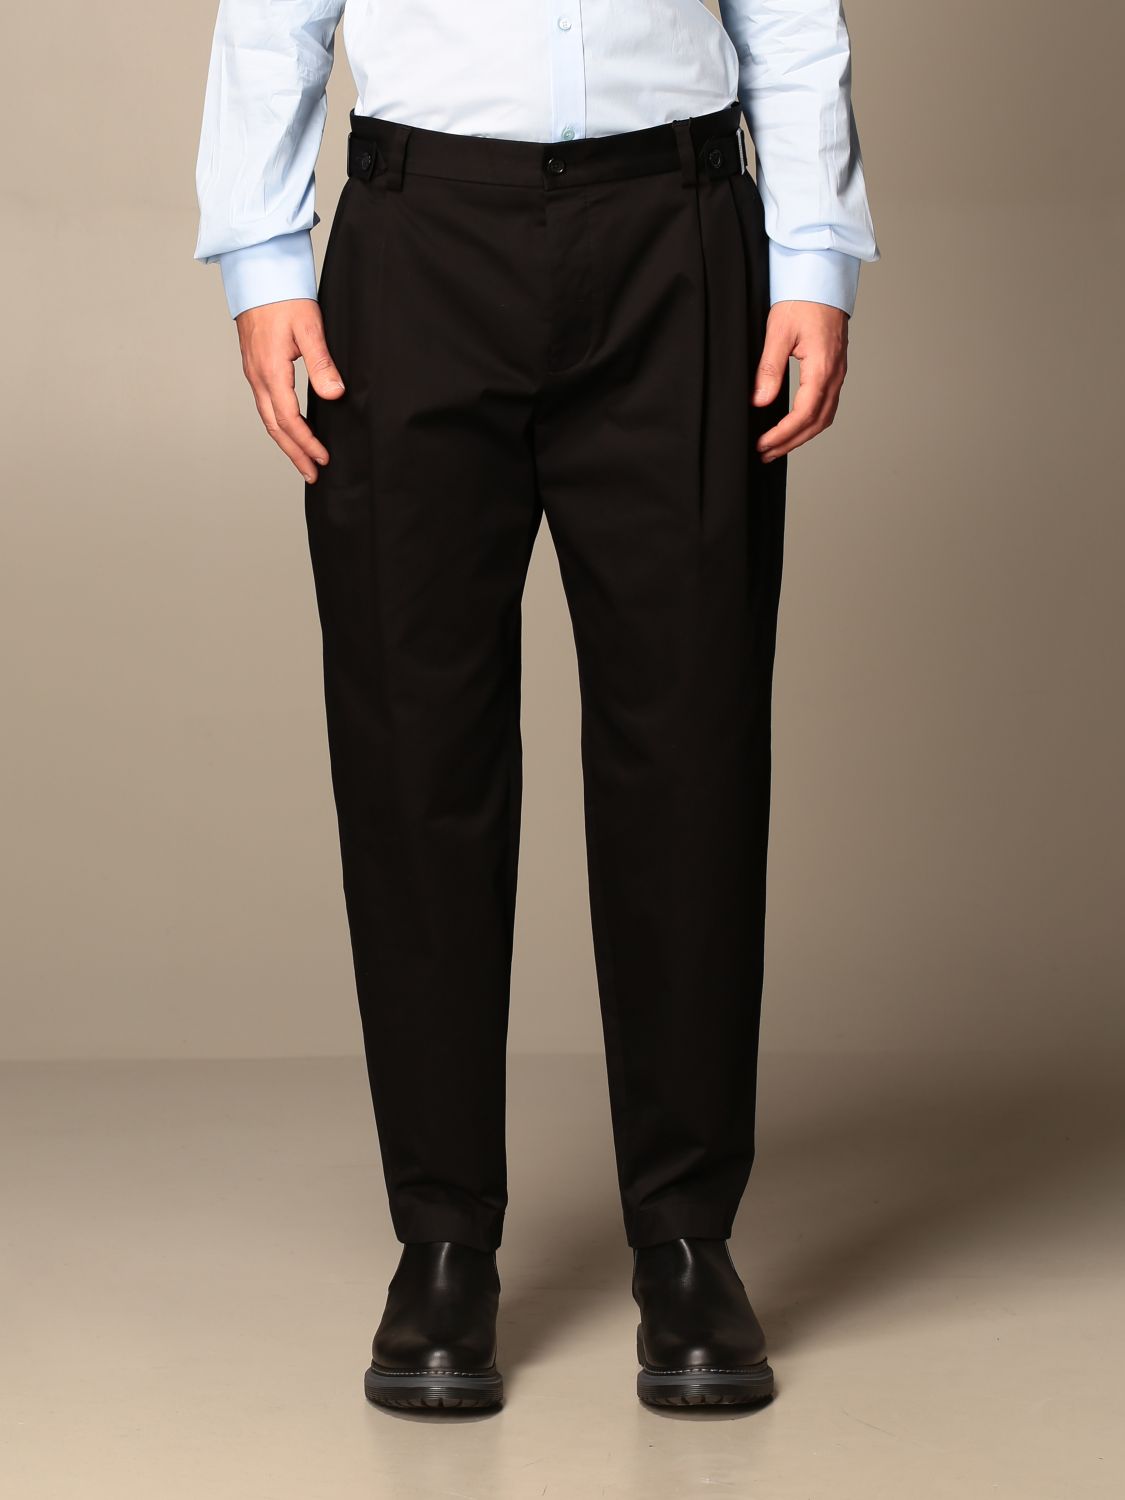 Dolce & Gabbana Outlet: trousers with low crotch | Pants Dolce ...